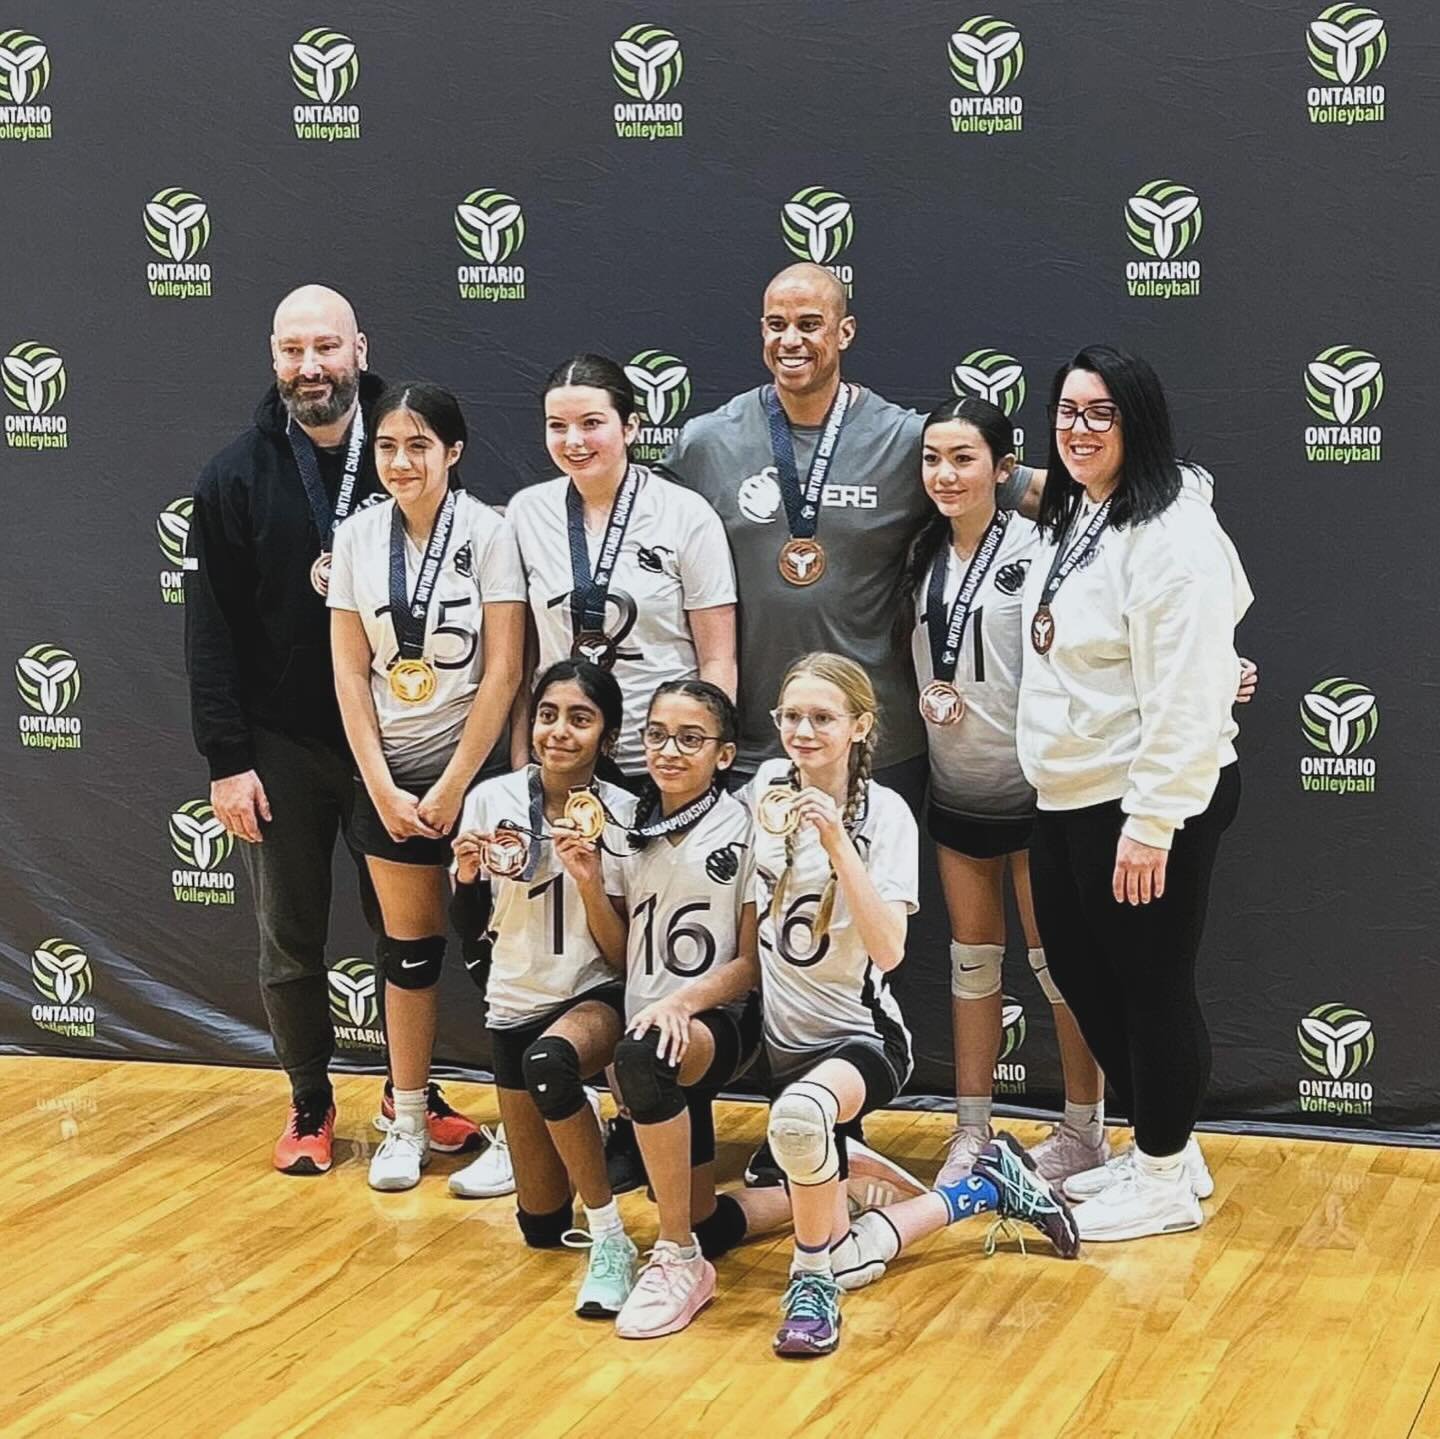 Such a great weekend at the Provincials for Our 12U Vipers&rsquo; Impulse Team! Team &ldquo;O&rdquo; brought home BRONZE in D1T3! What a fabulous achievement for these girls who are playing volleyball competitively for the first year! Vipers&rsquo; 1